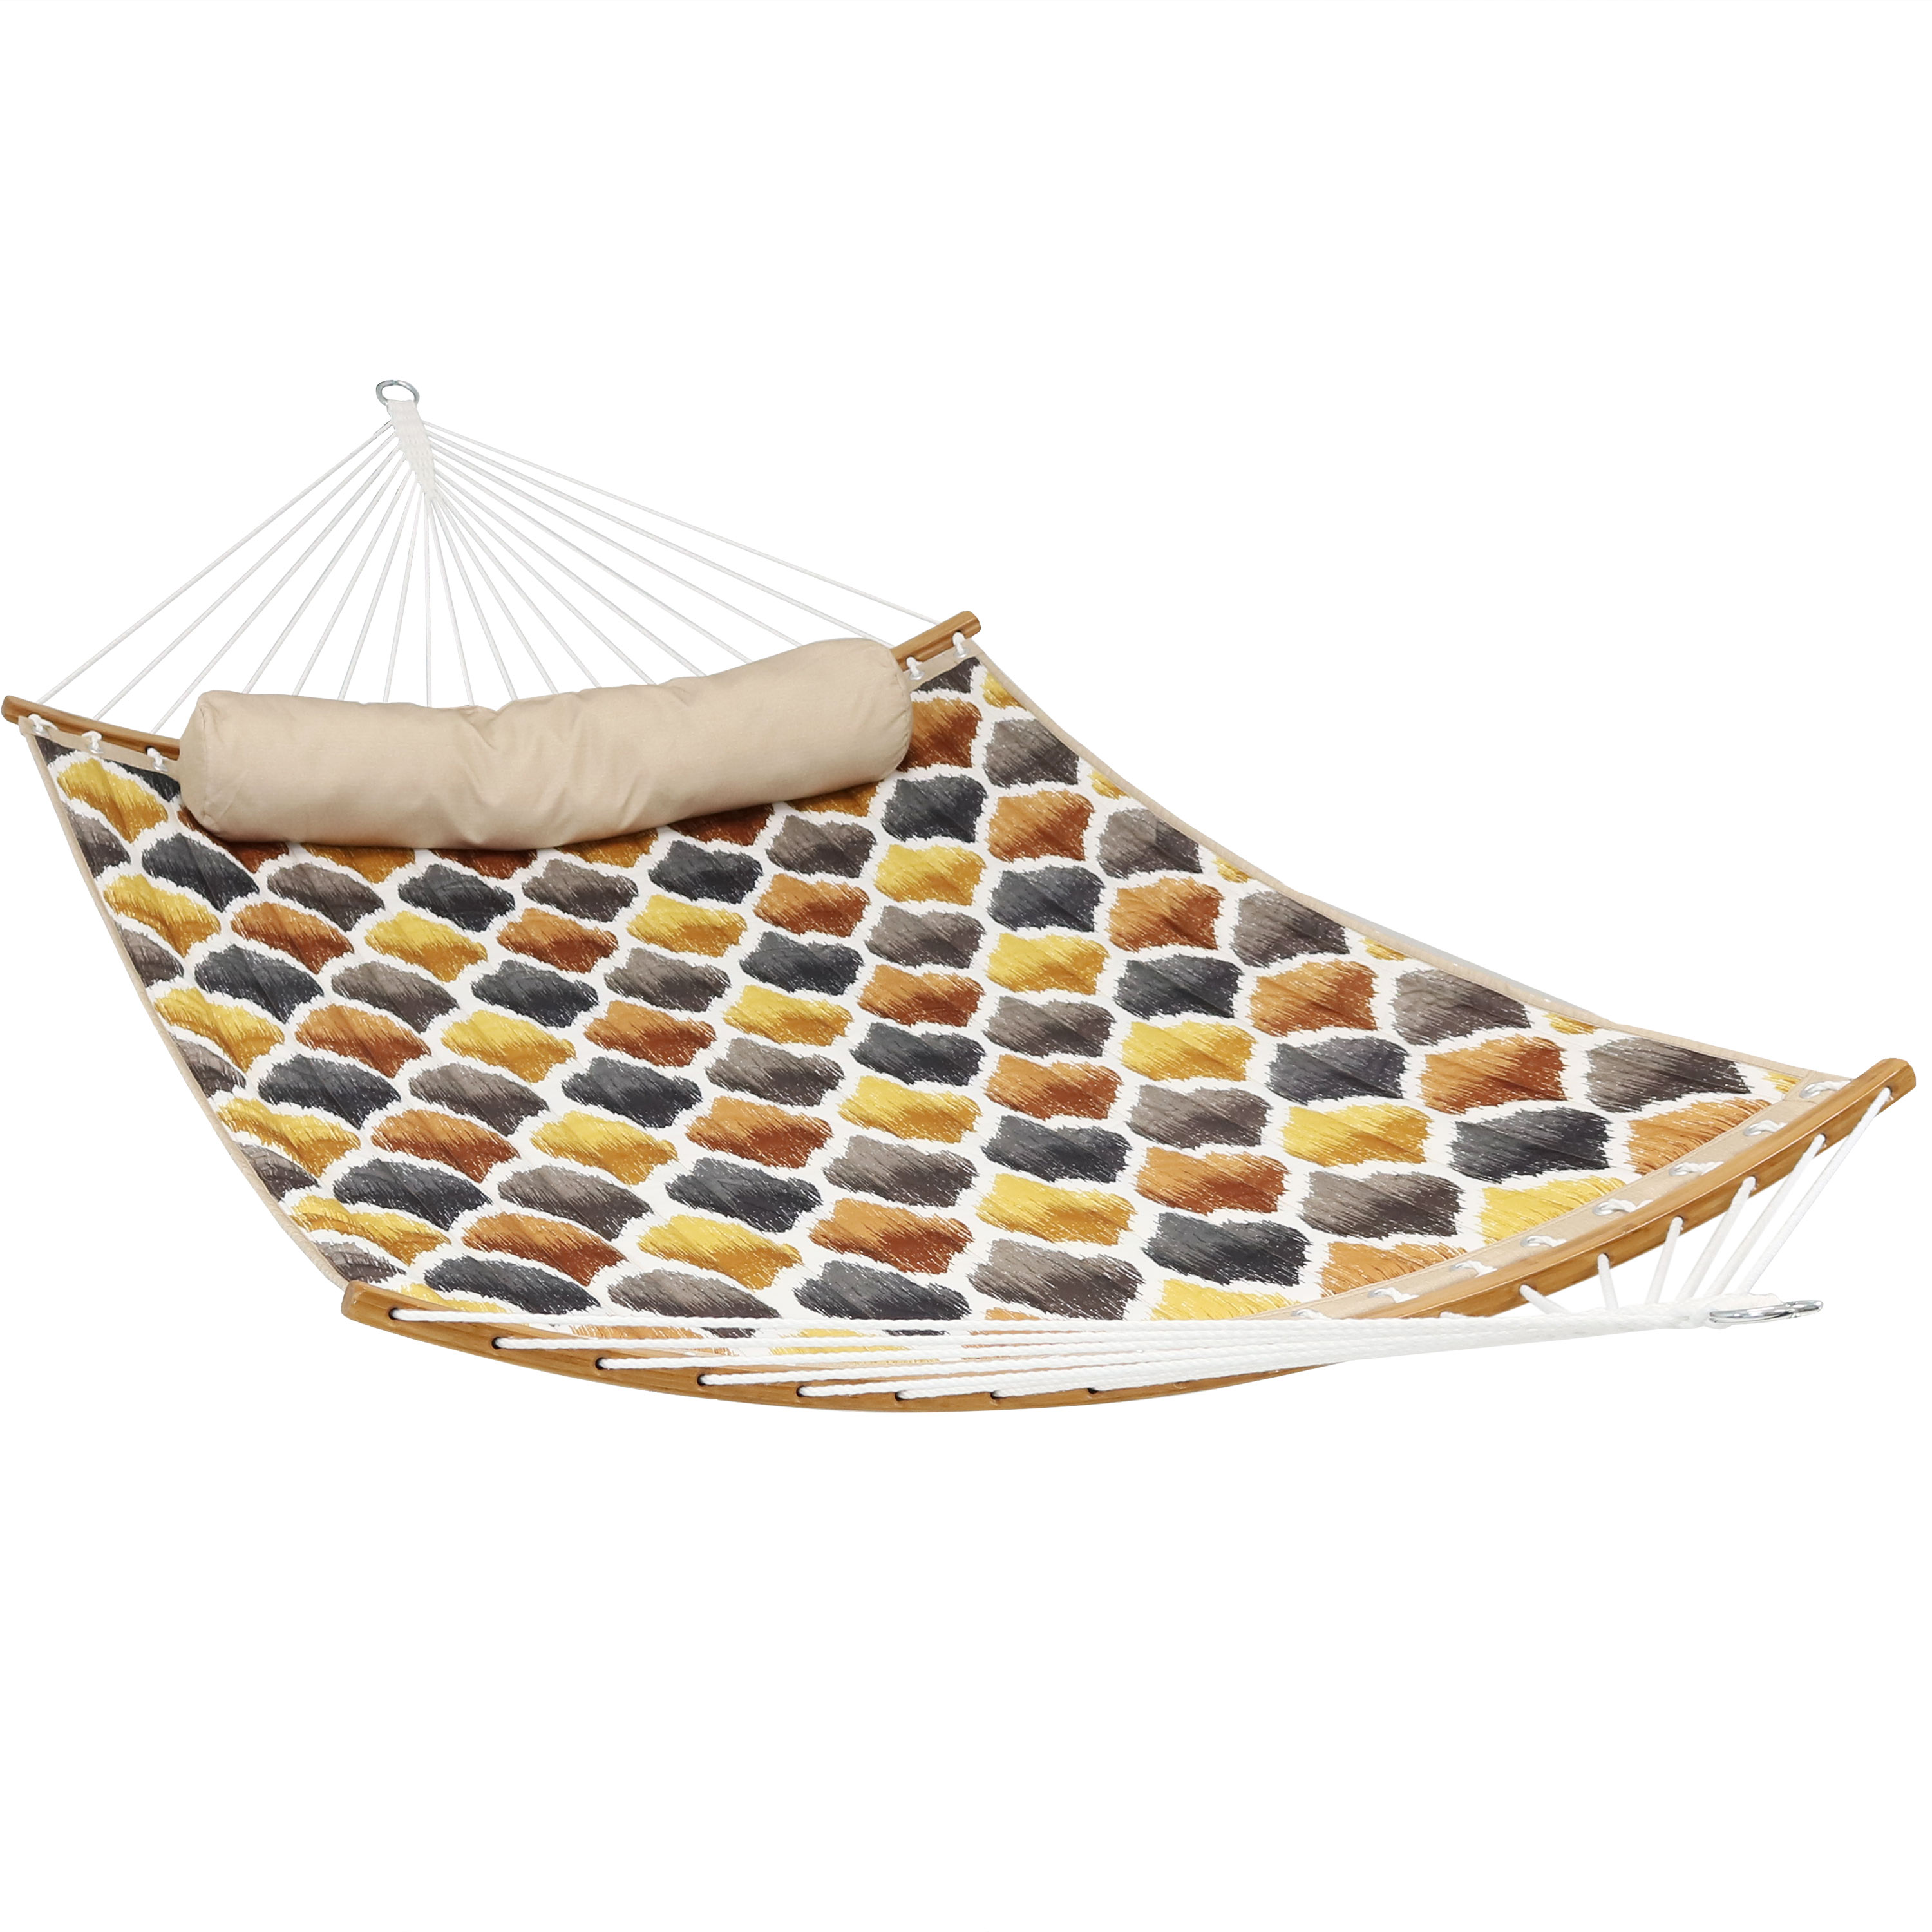 Sunnydaze Quilted 2-Person Hammock with Curved Bamboo Spreader Bars - Heavy-Duty 450-Pound Weight Capacity - Polyester Hammock - Gold and Bronze Quatrefoil - image 1 of 6